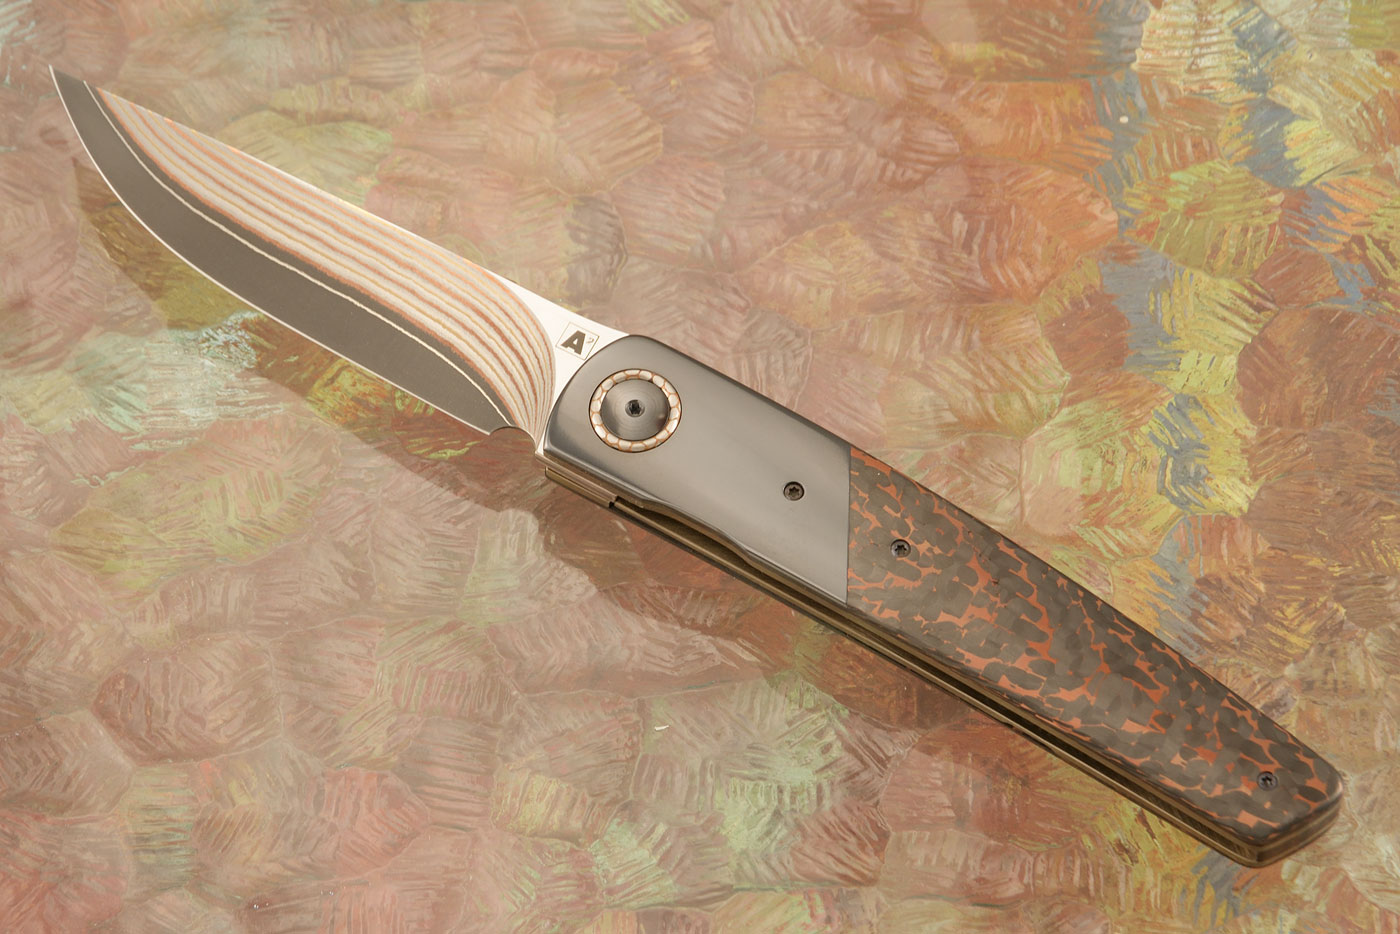 A10 Dress Front Flipper with Copper Snakeskin FatCarbon, Zirconium and Super Conductor (Ceramic IKBS) - Stainless Yu-Shoku